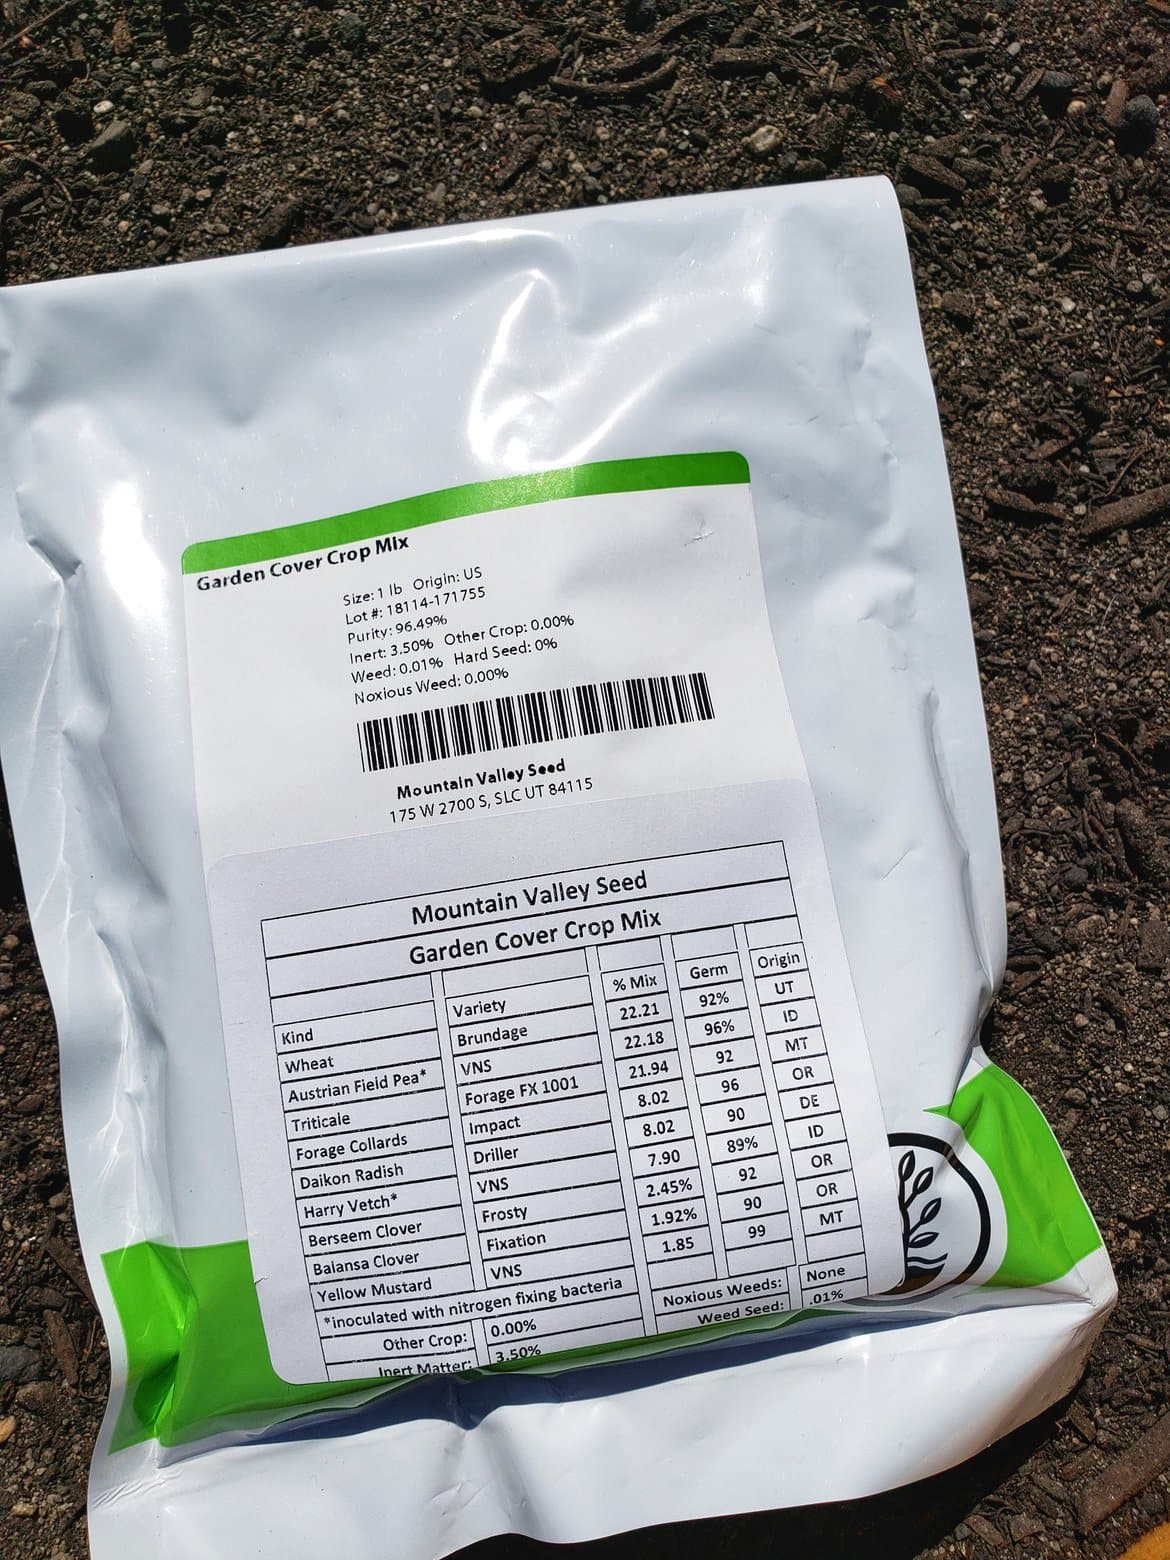 True Leaf Market cover crop from Mountain Valley Seed Company in the package